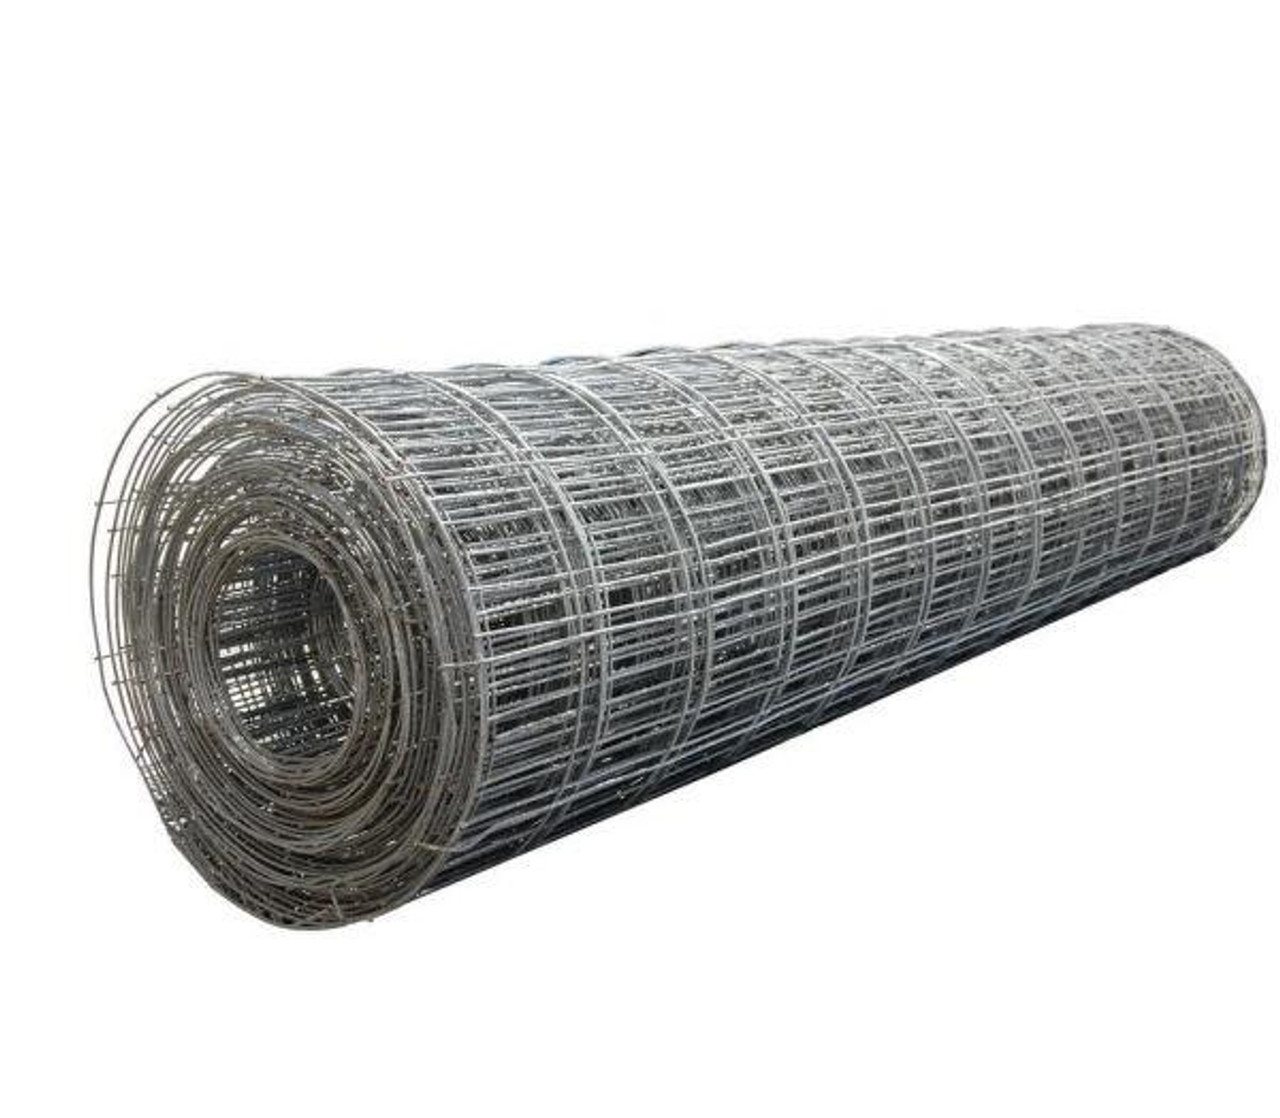 Tie Wire 16 Gauge Thick, Black or (Gold) PVC Coated